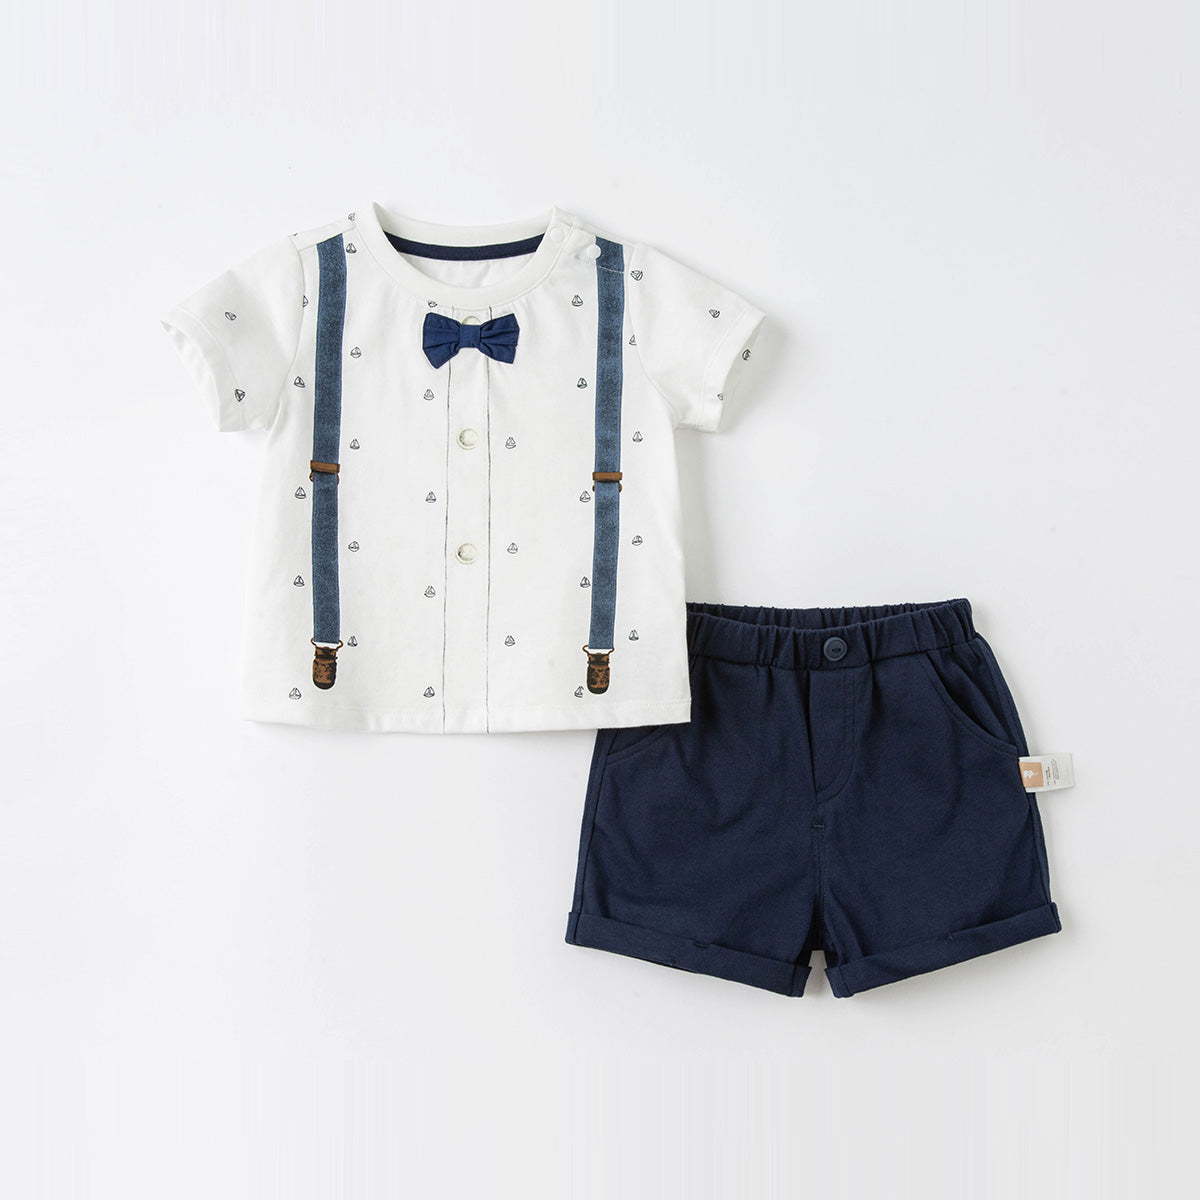 [Last] Sailor Themed Bowtie and Shorts Set 6yrs(120cm)